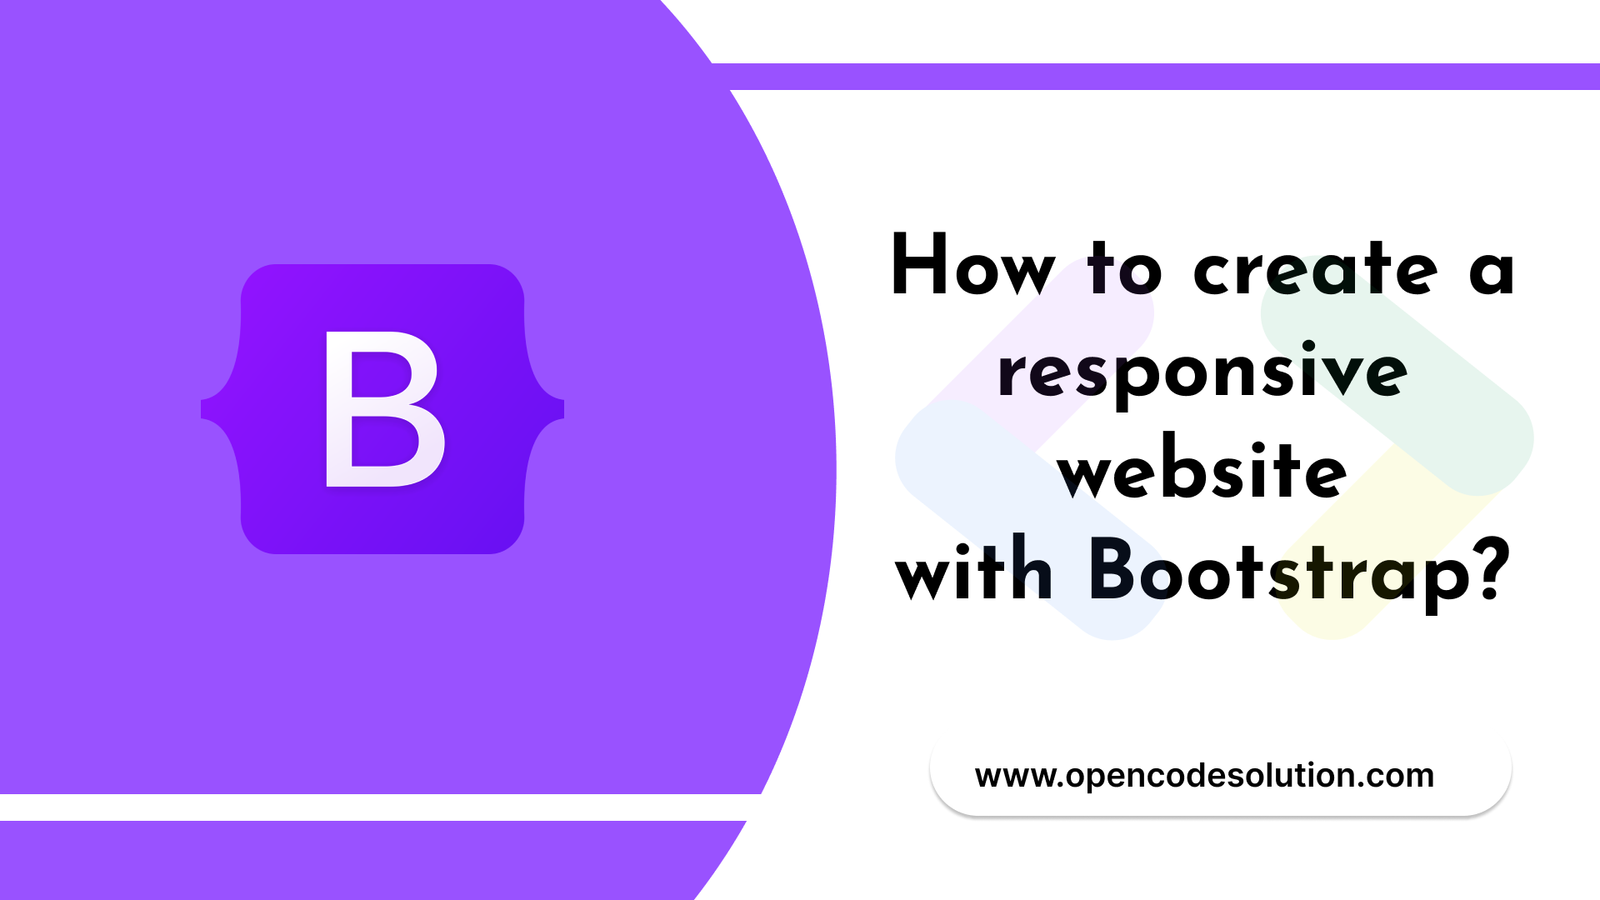 How to create a responsive website with Bootstrap?